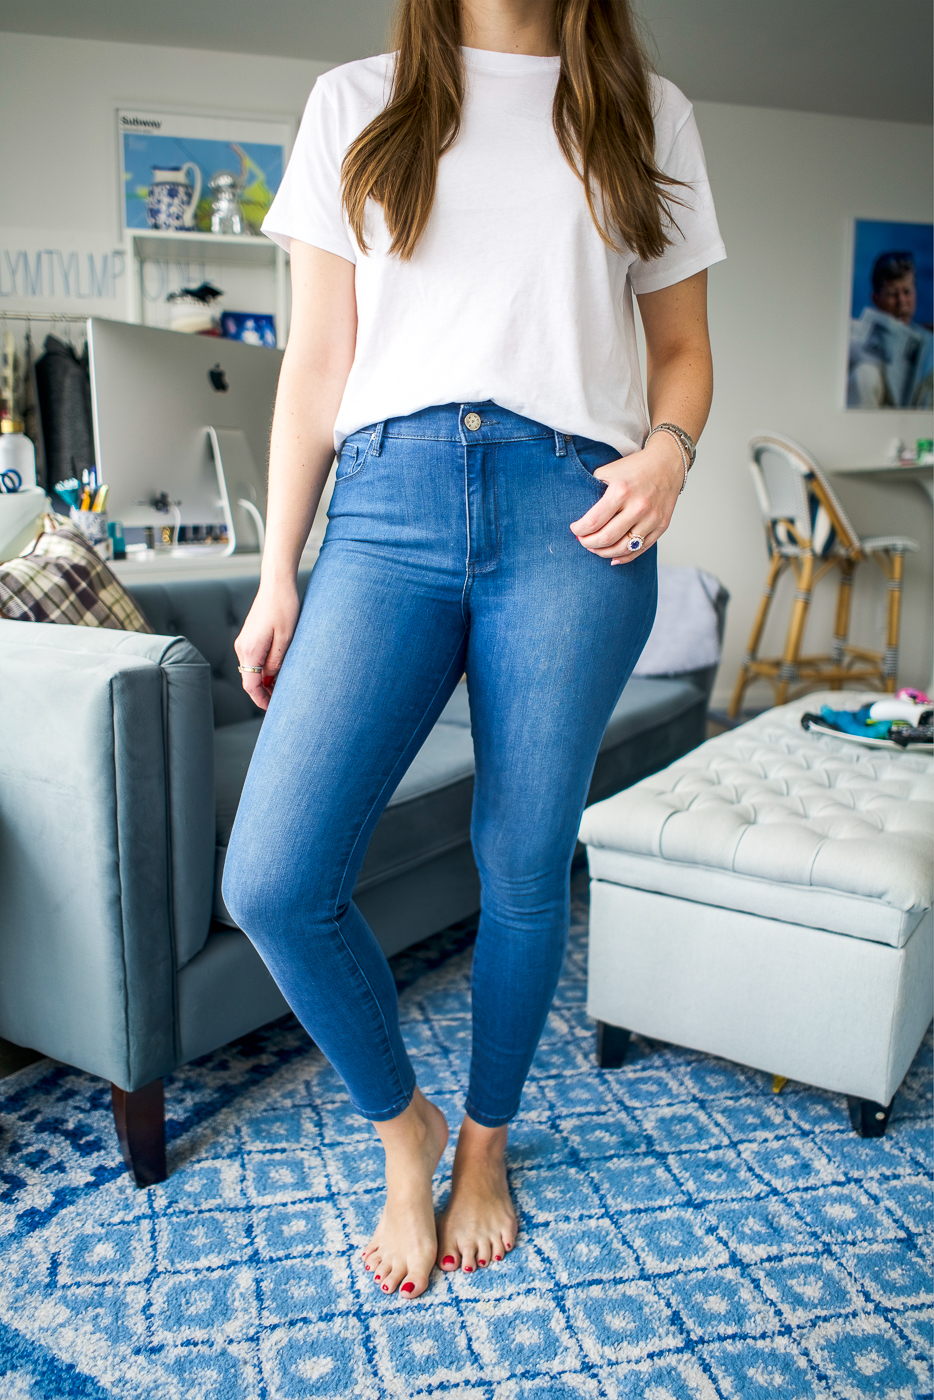 Mott & Bow Denim Review + Promo Code | Connecticut Fashion and ...